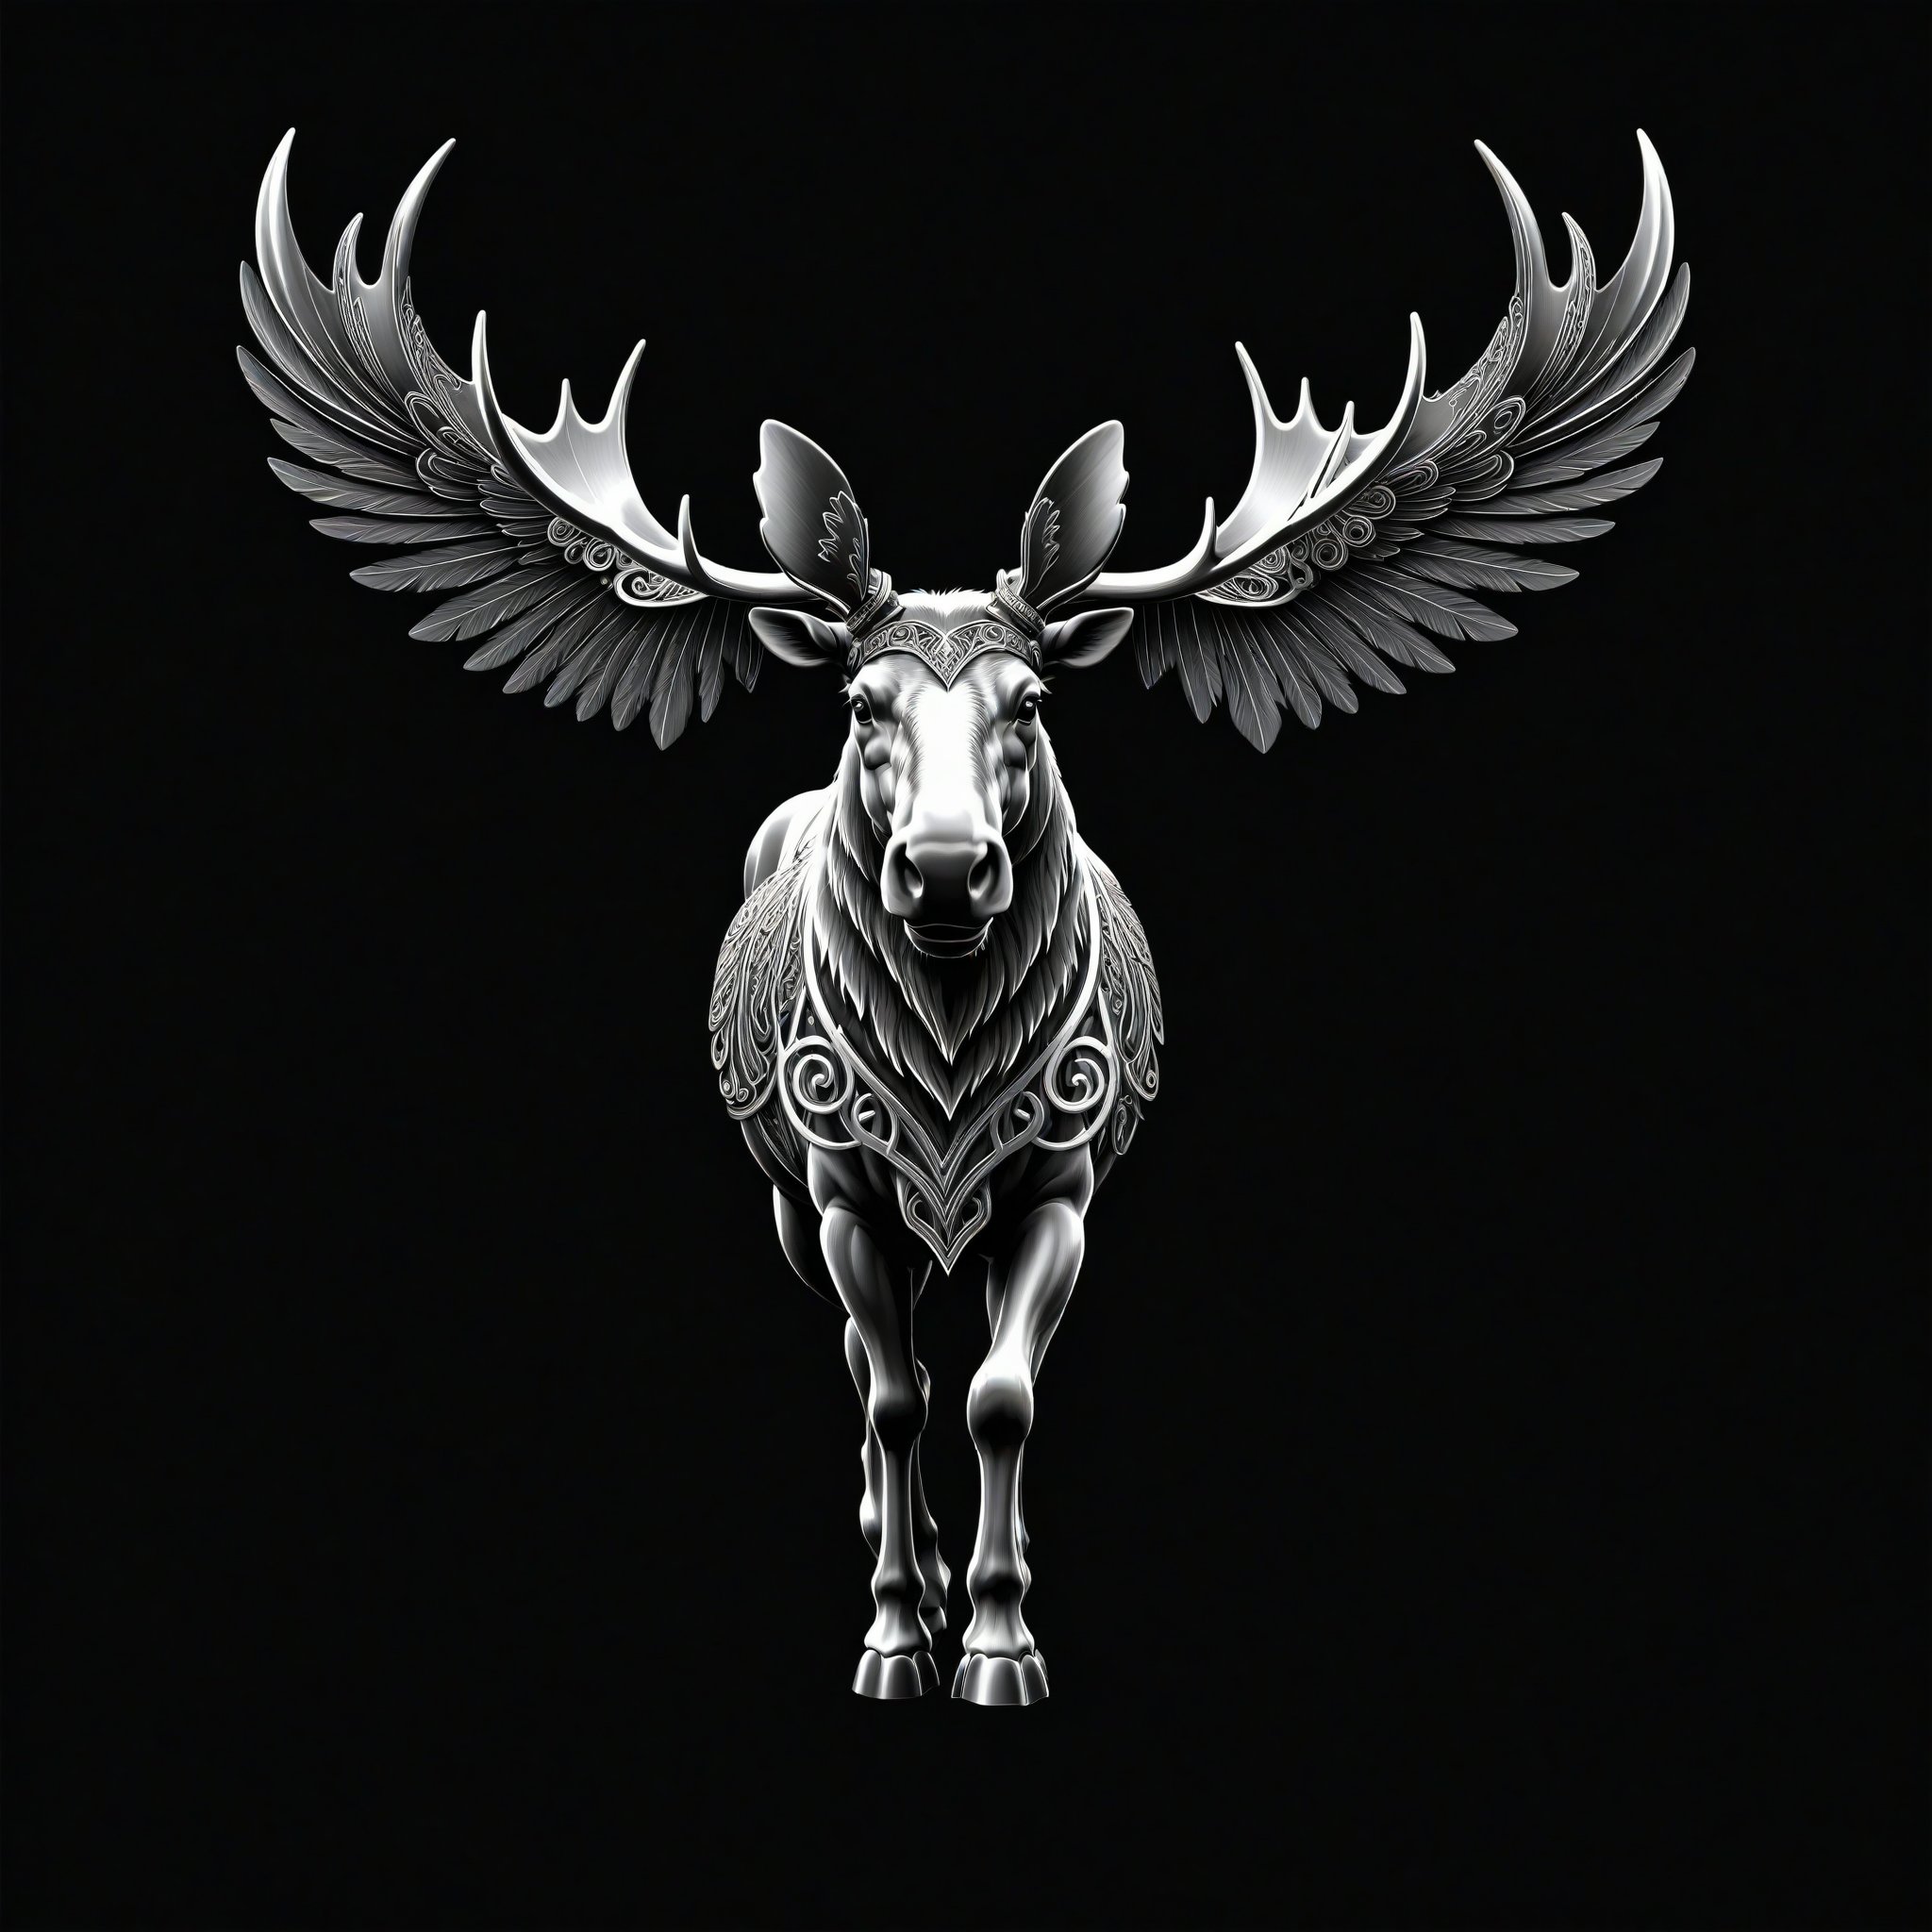 a moose tribal whit wing majestic with clasic ornament Mechanical lines Elegance T-shirt design, BLACK BACKGROUND